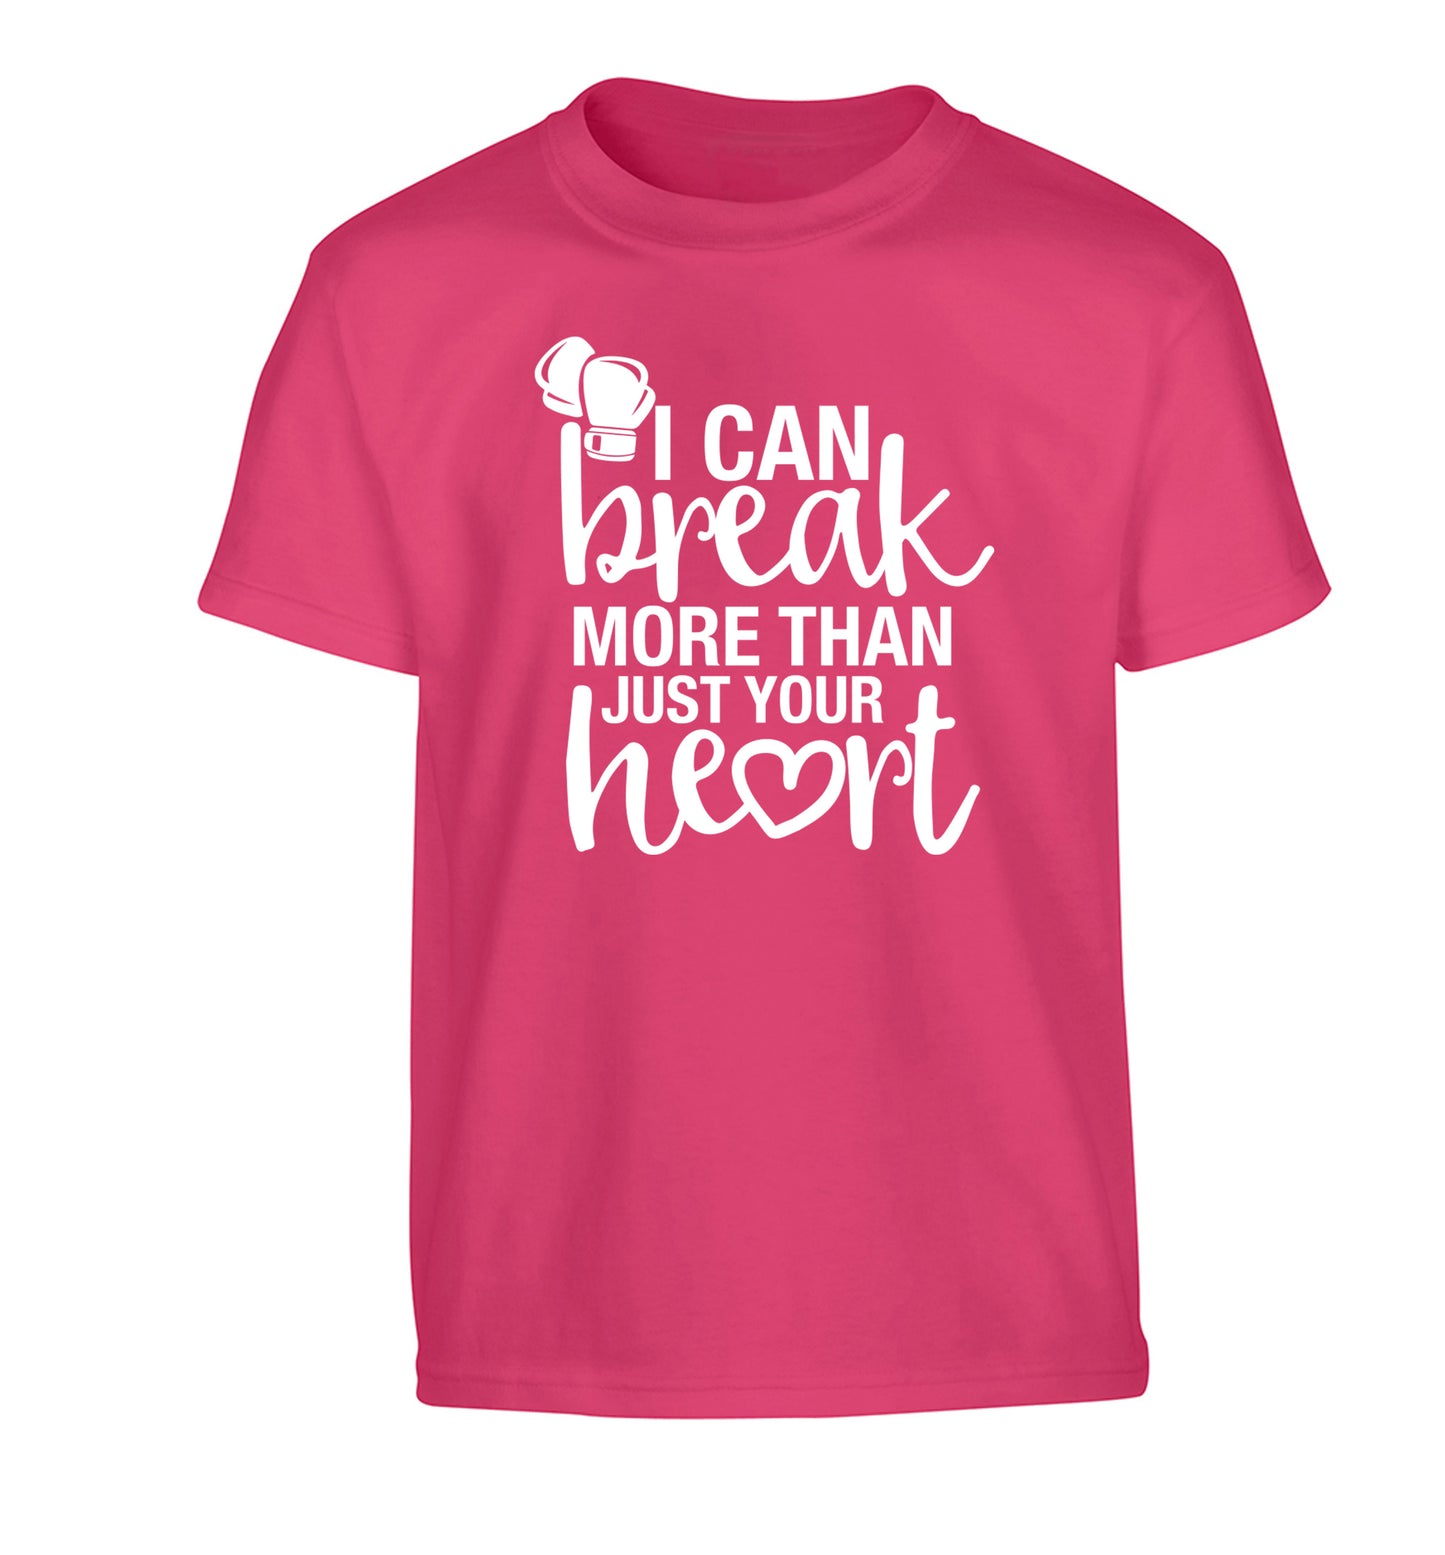 I can break more than just your heart Children's pink Tshirt 12-13 Years